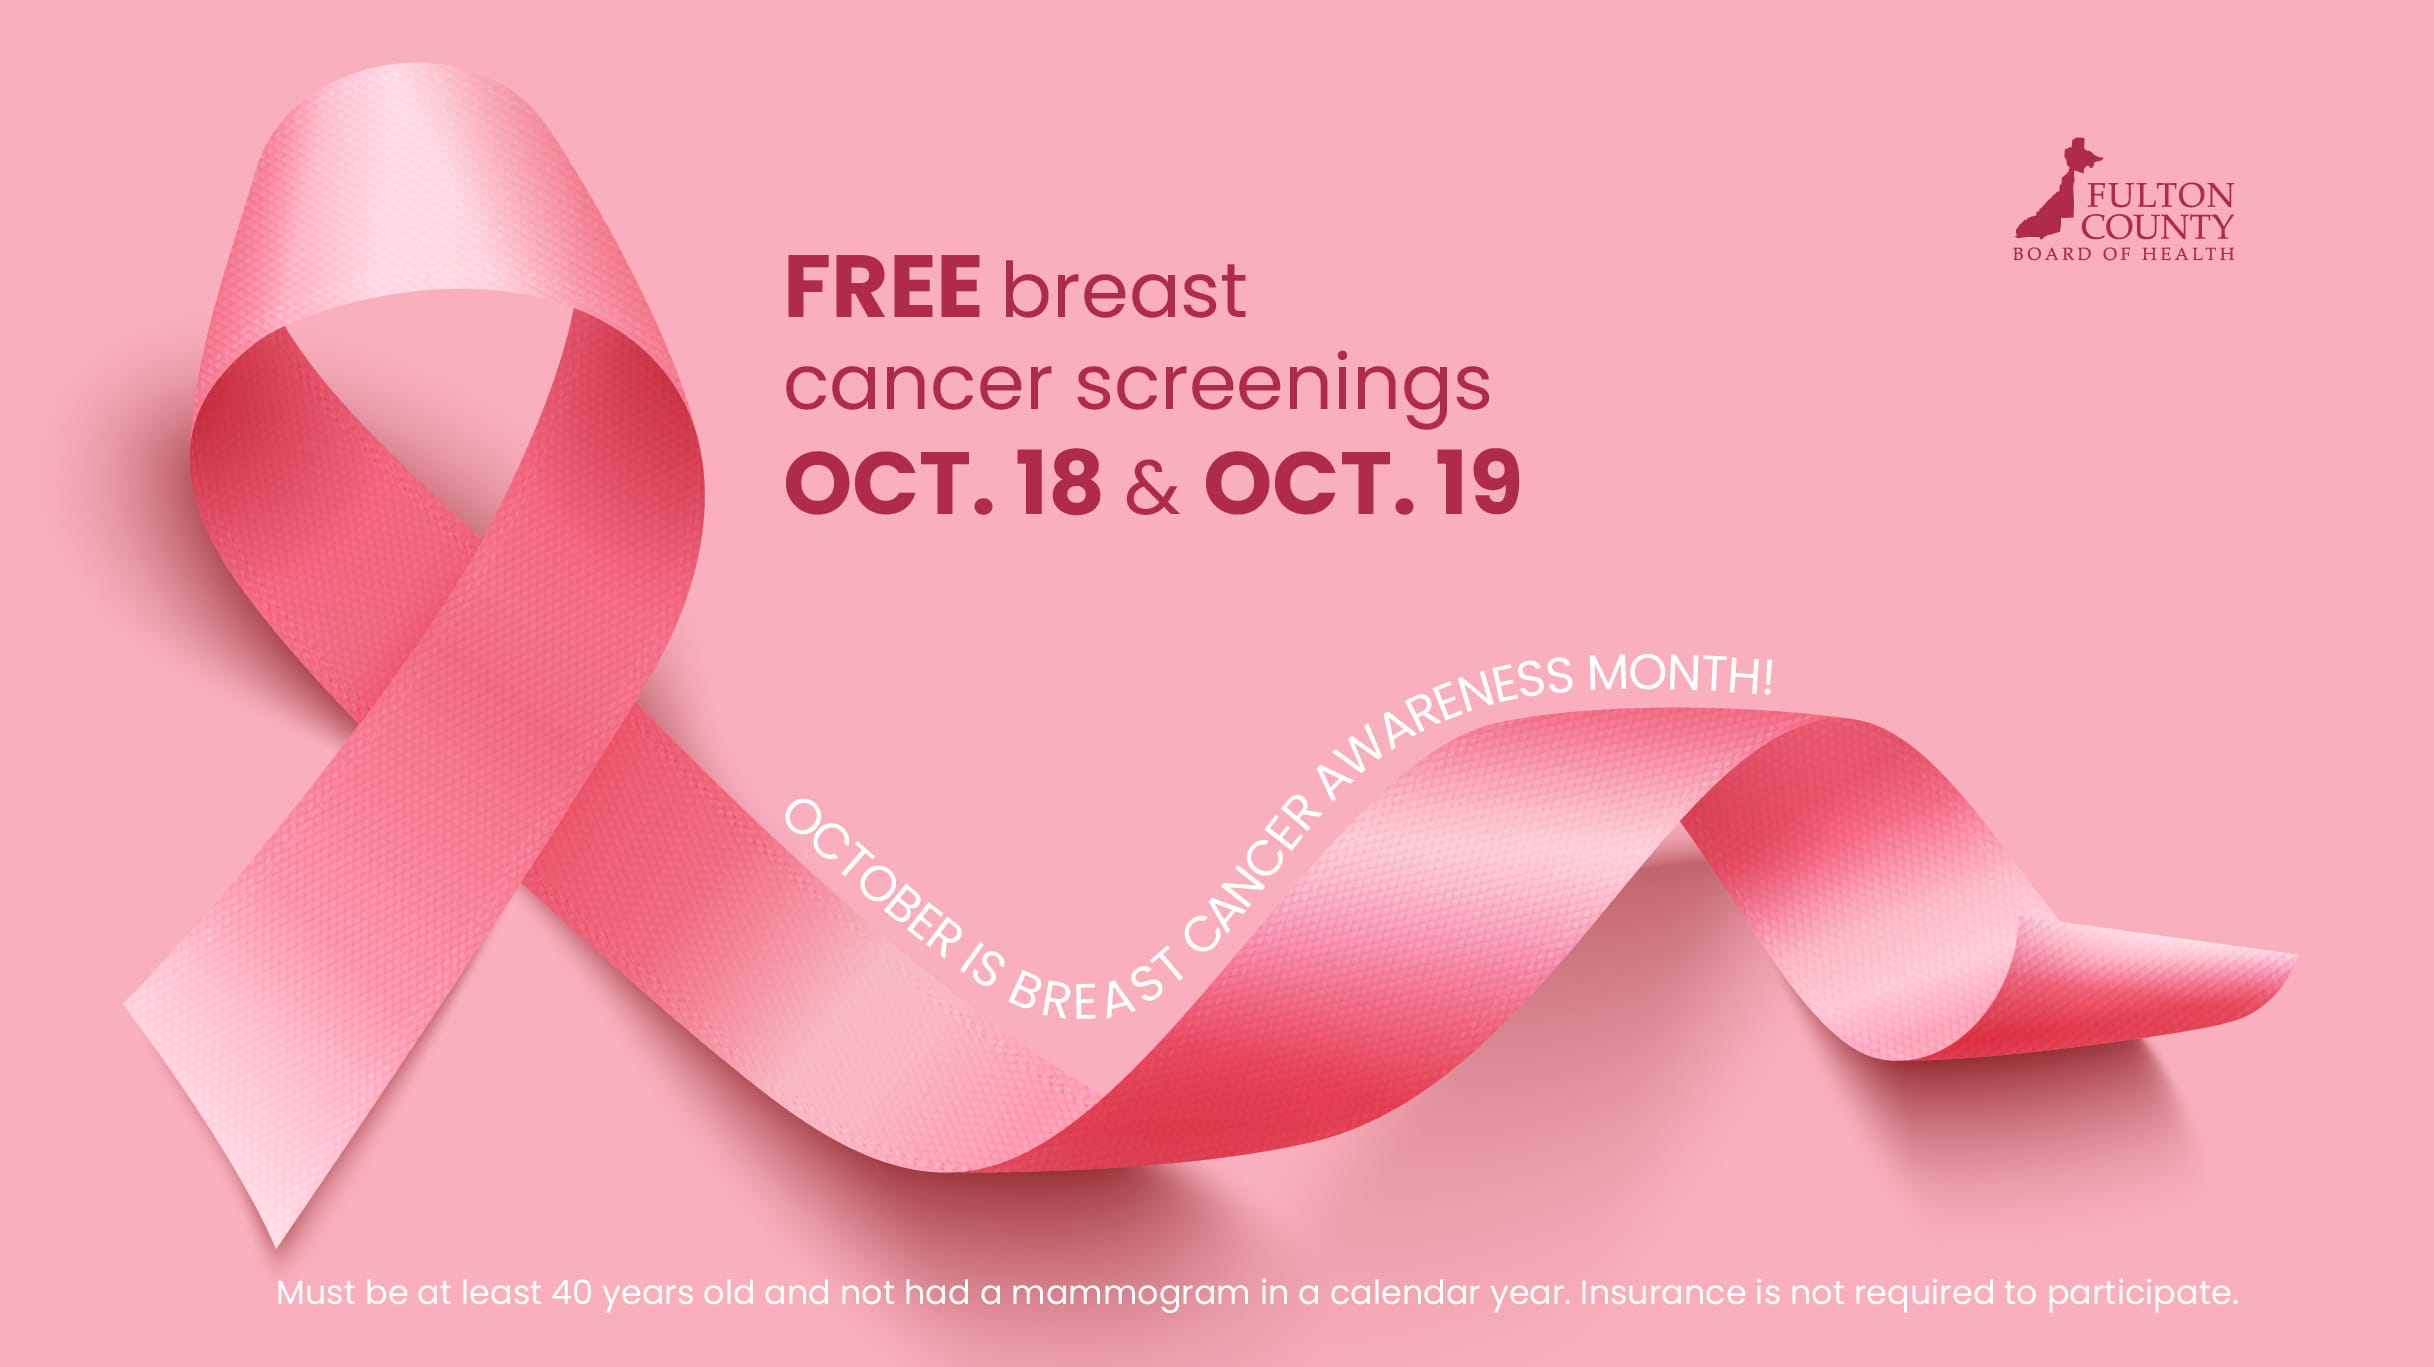 Fulton County Board of Health to Offer Free Breast Cancer Screenings at County Health Centers